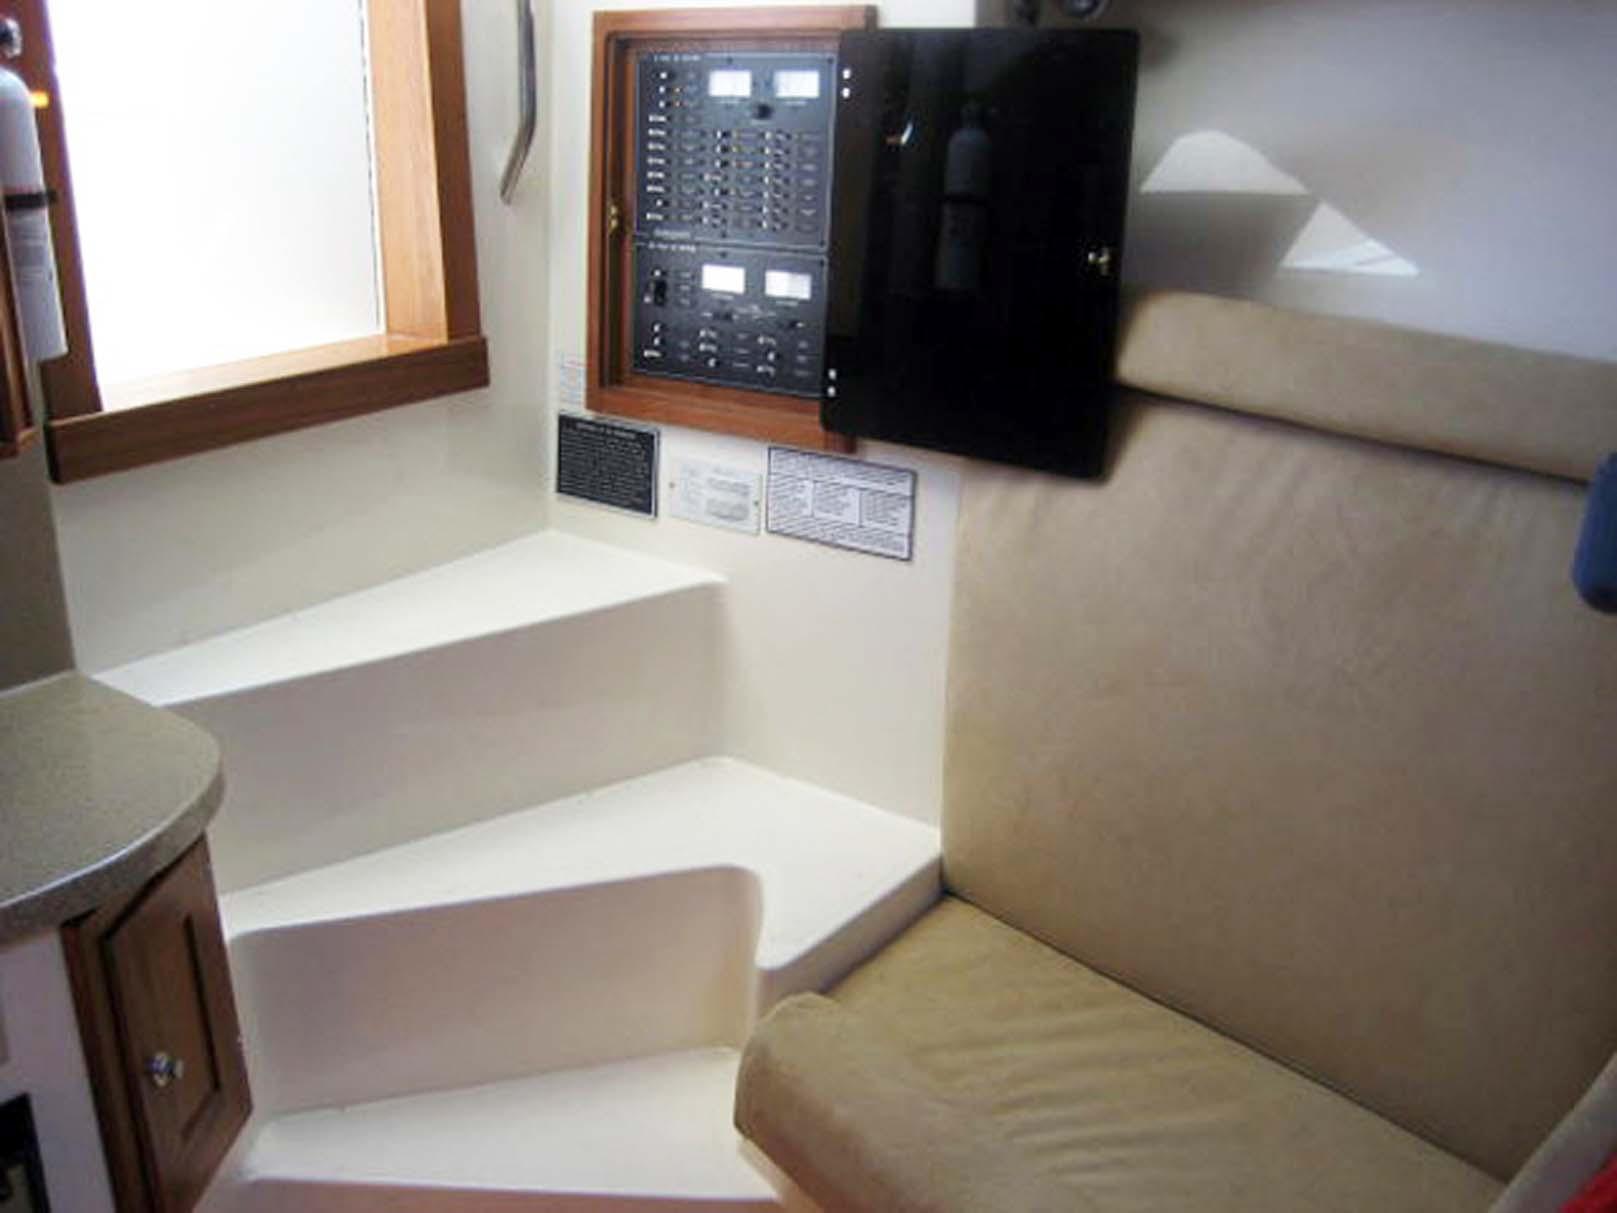 Cabin Entry and Electrical Panel